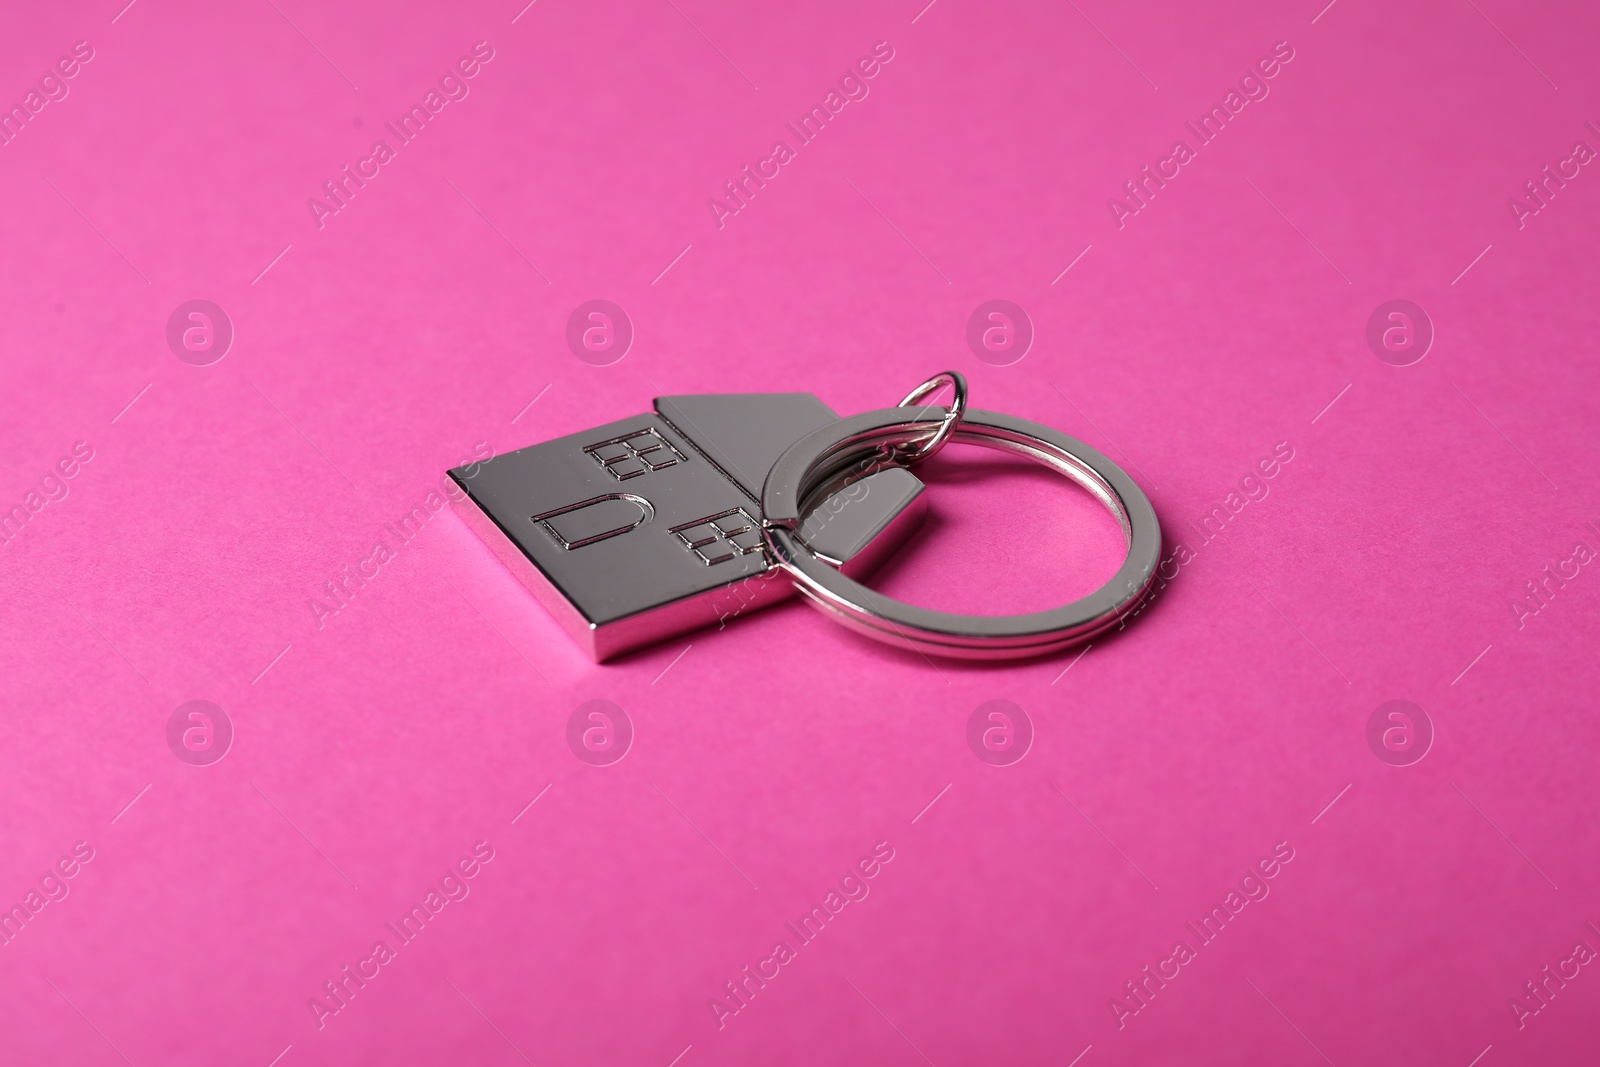 Photo of Metallic keychain in shape of house on bright pink background